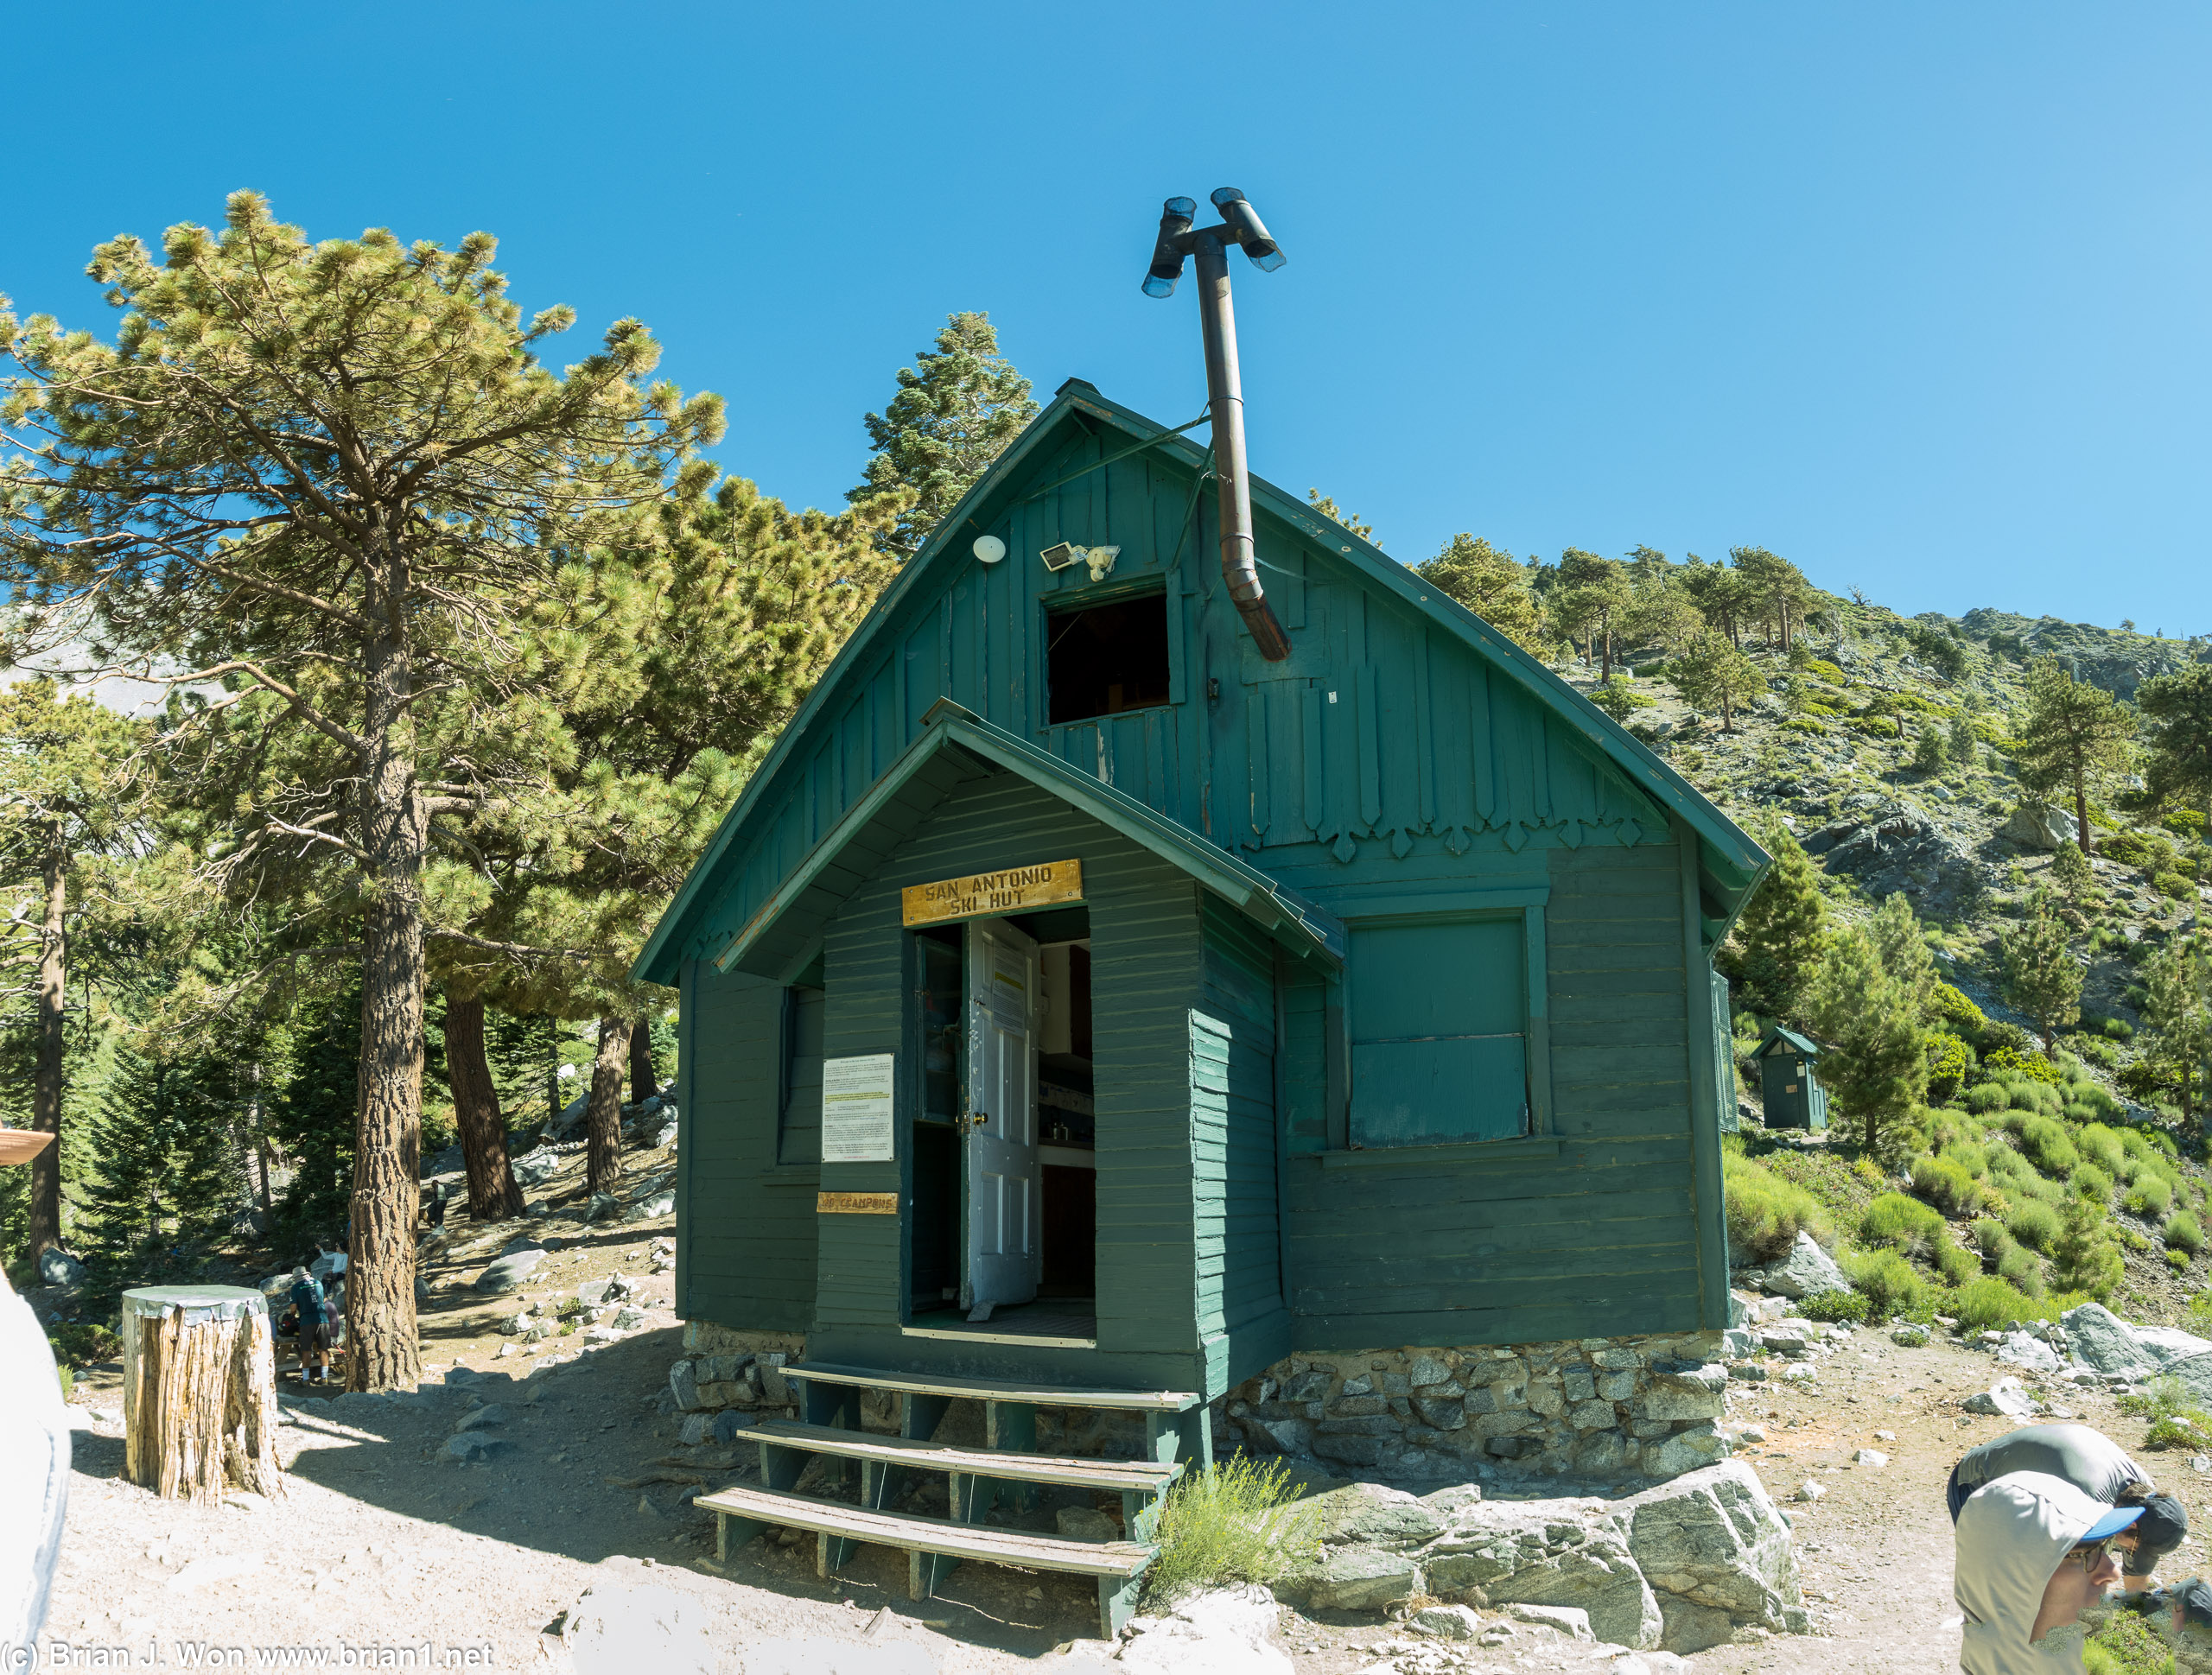 San Antonio Ski Hut has a cabin for rent and drinkable water.